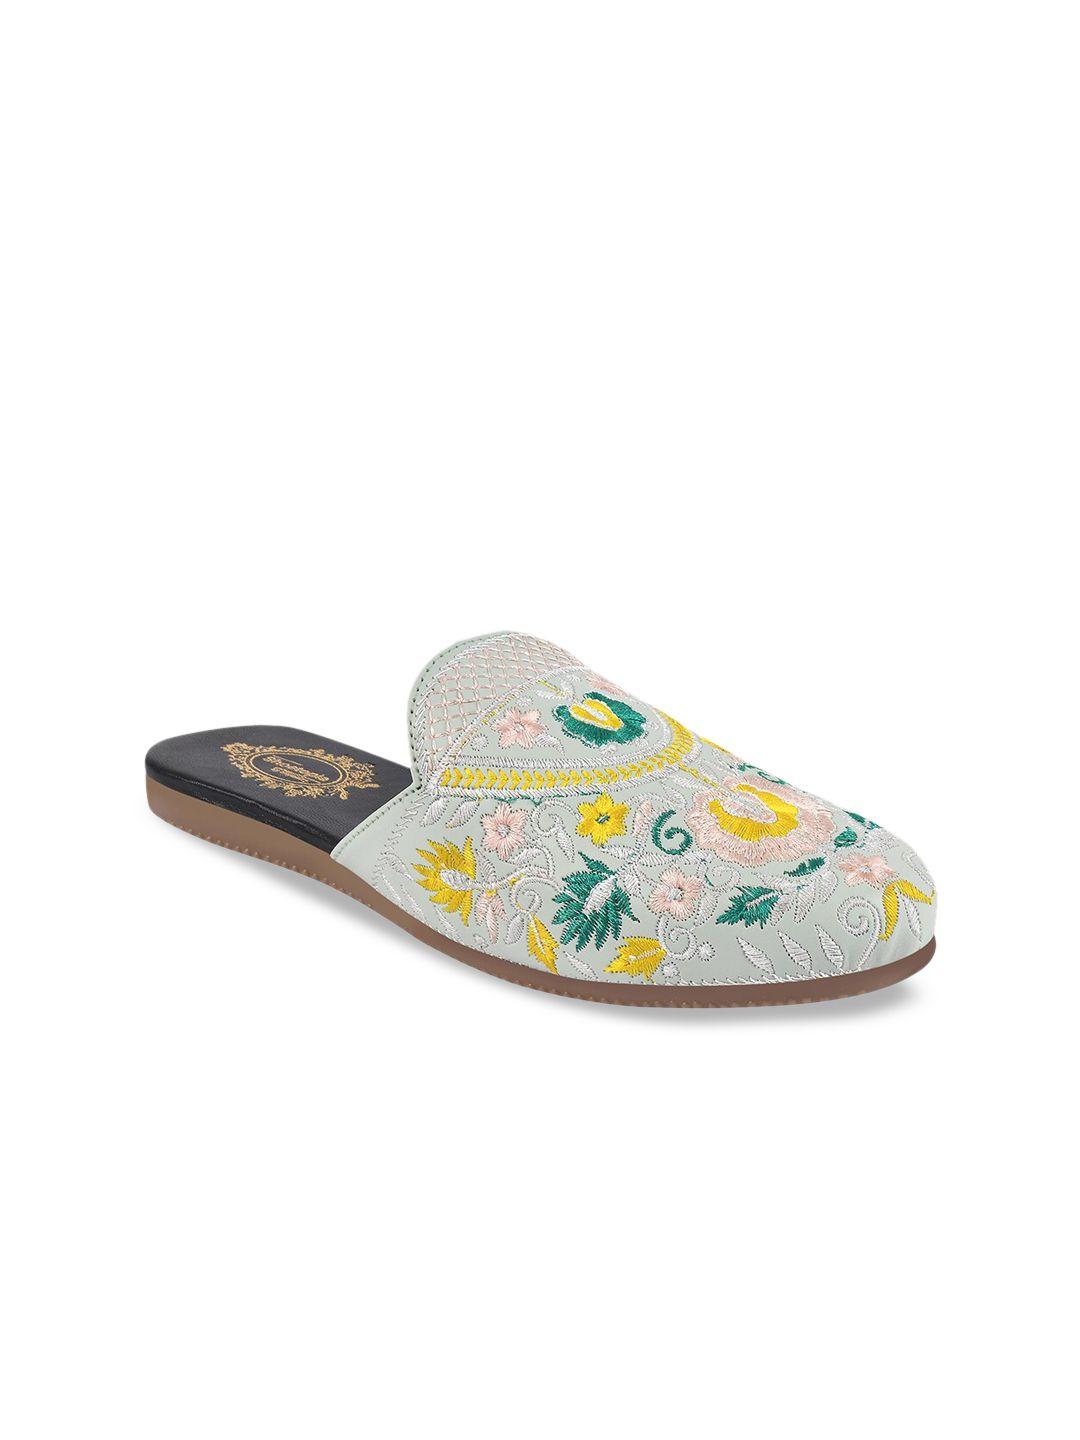 shoetopia-girls-embroidered-ethnic-mules